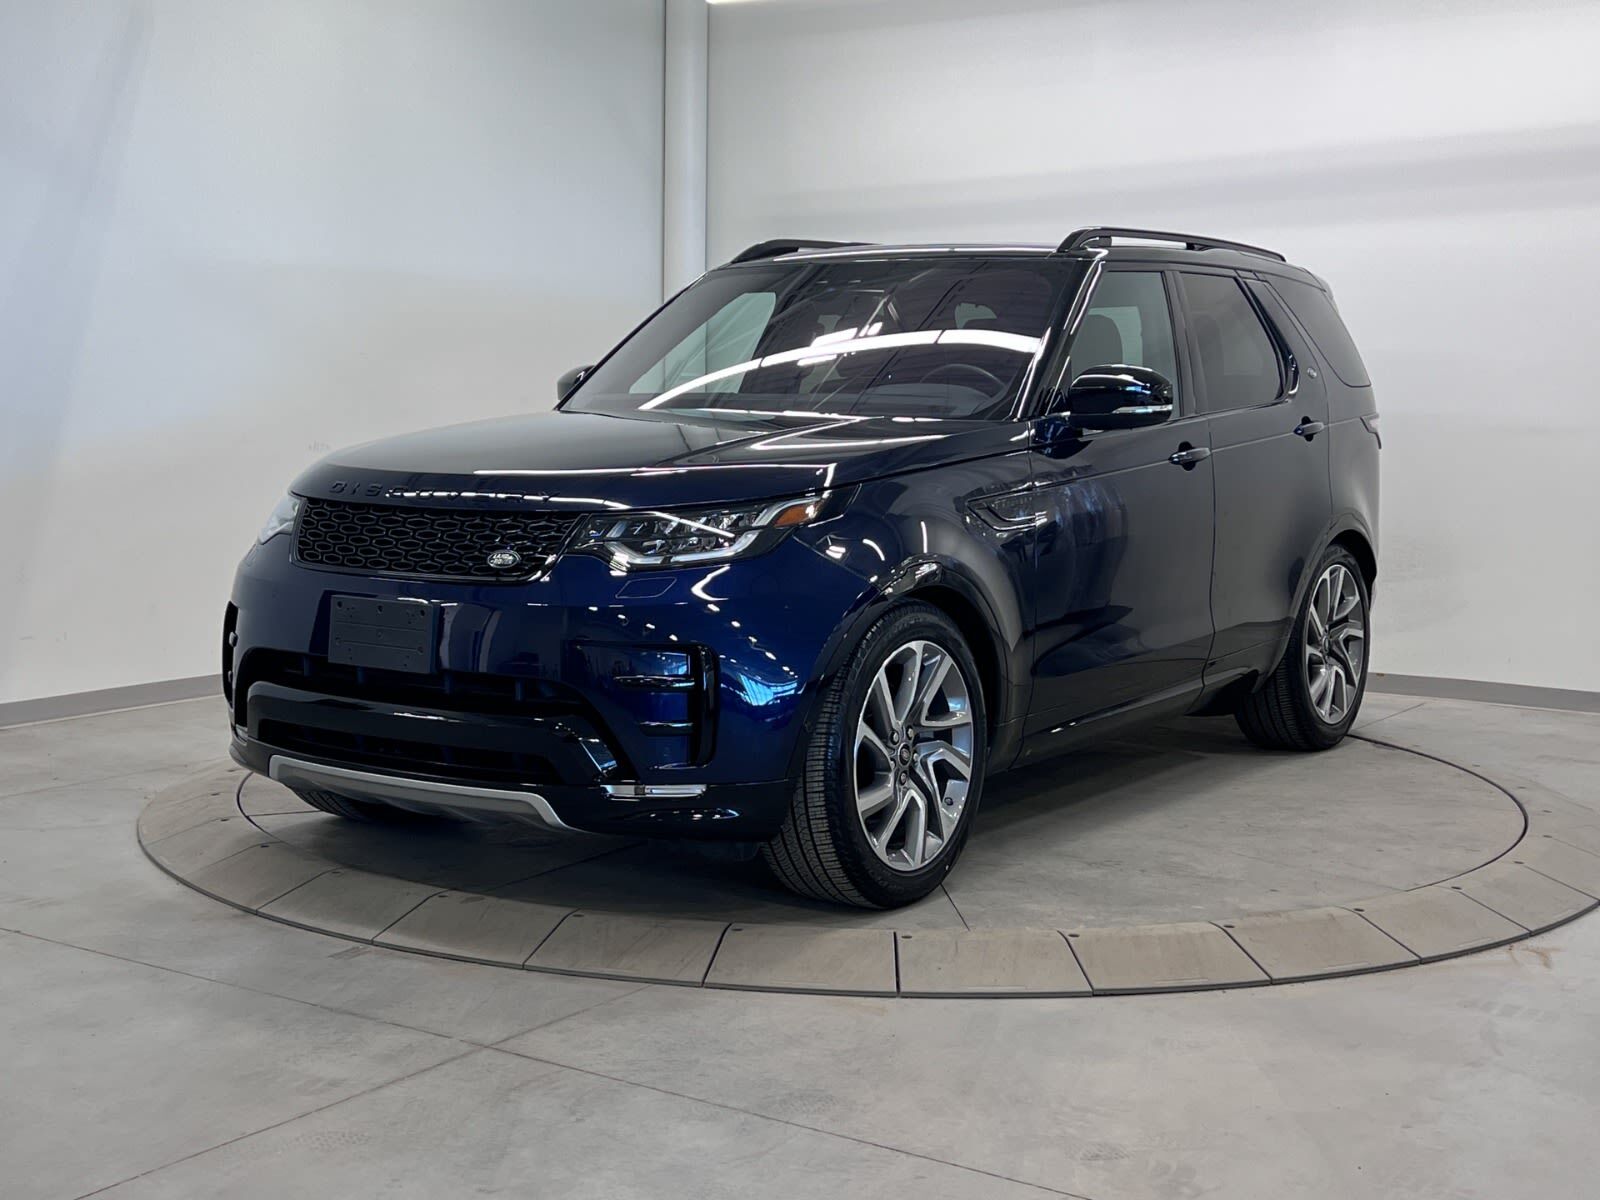 2020 Land Rover Discovery CERTIFIED PRE OWNED RATES AS LOW AS 3.99%